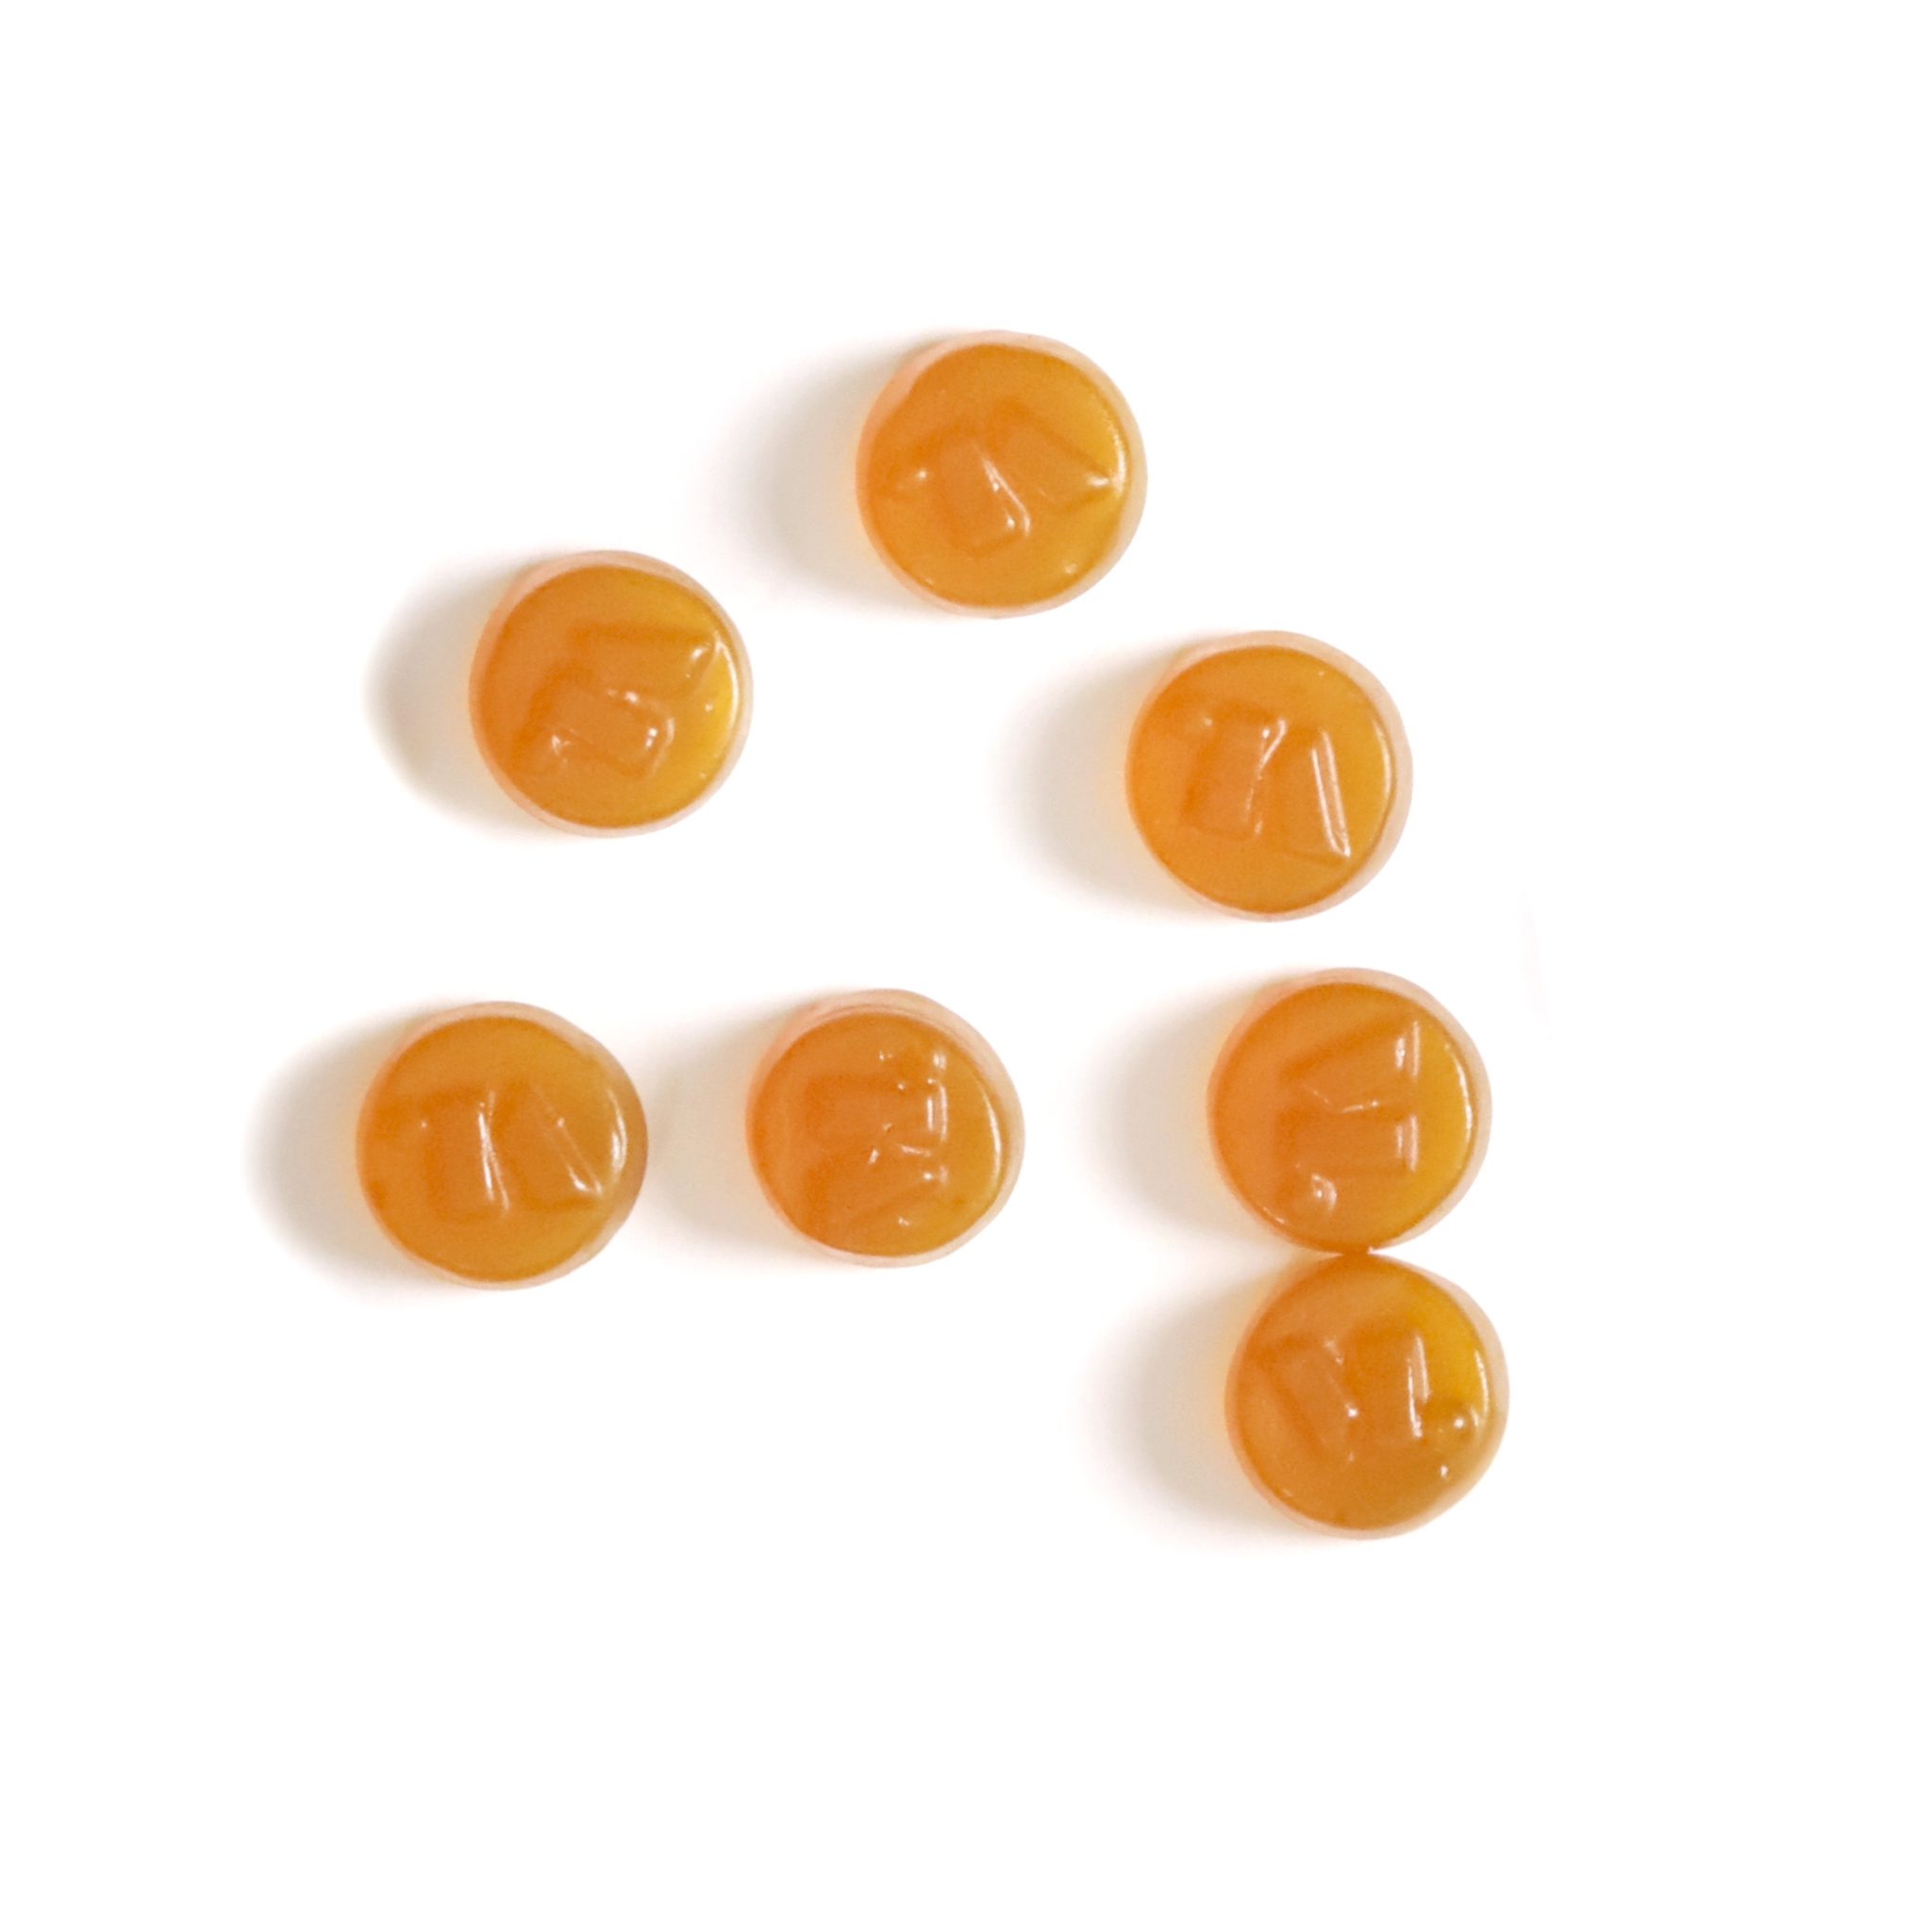 Where can I get the best quality hHC gummies?